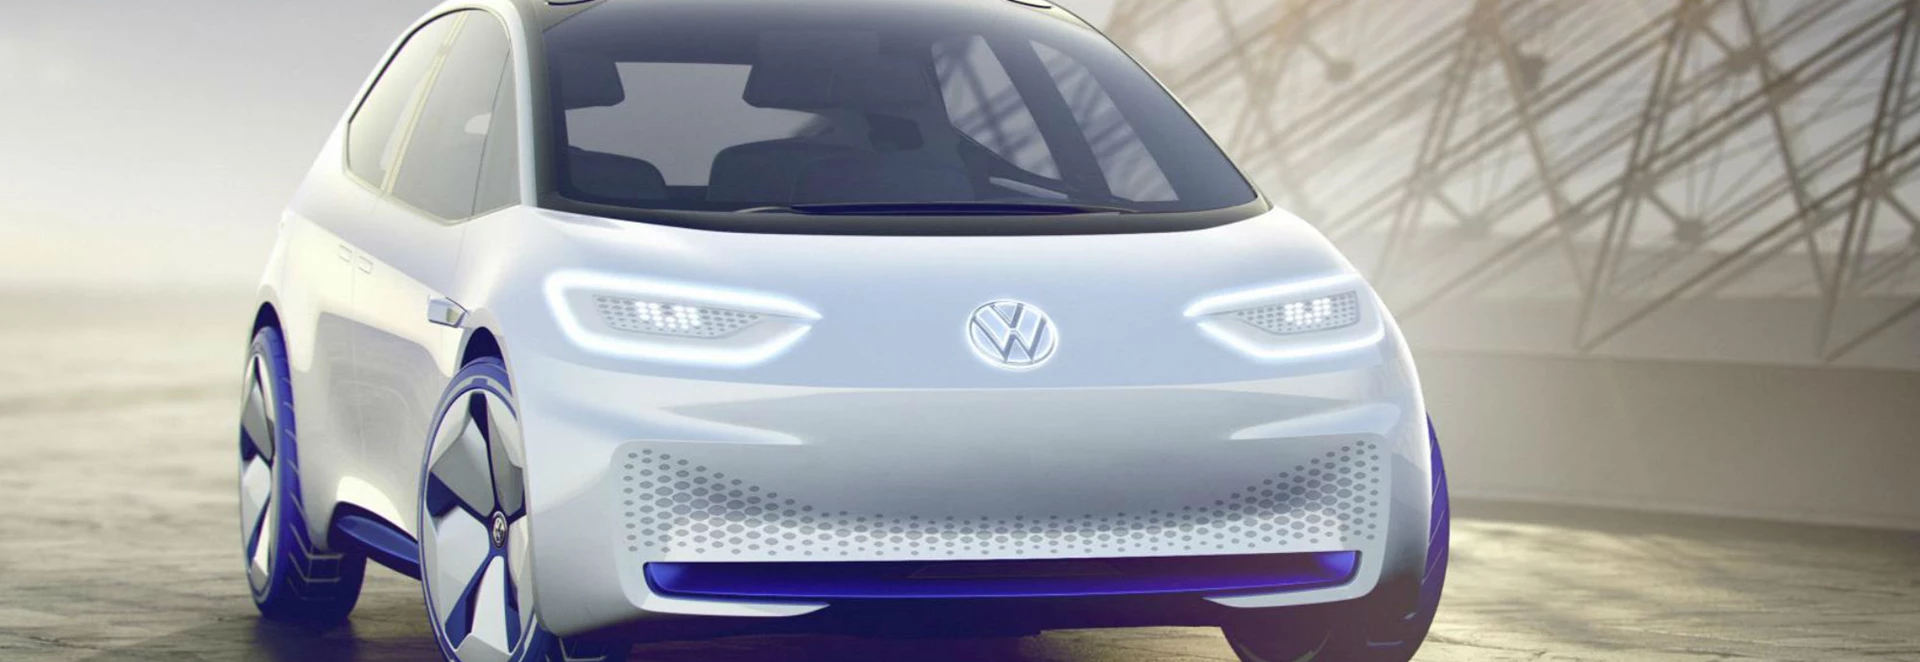 Volkswagen aiming to overtake Tesla in electric car race